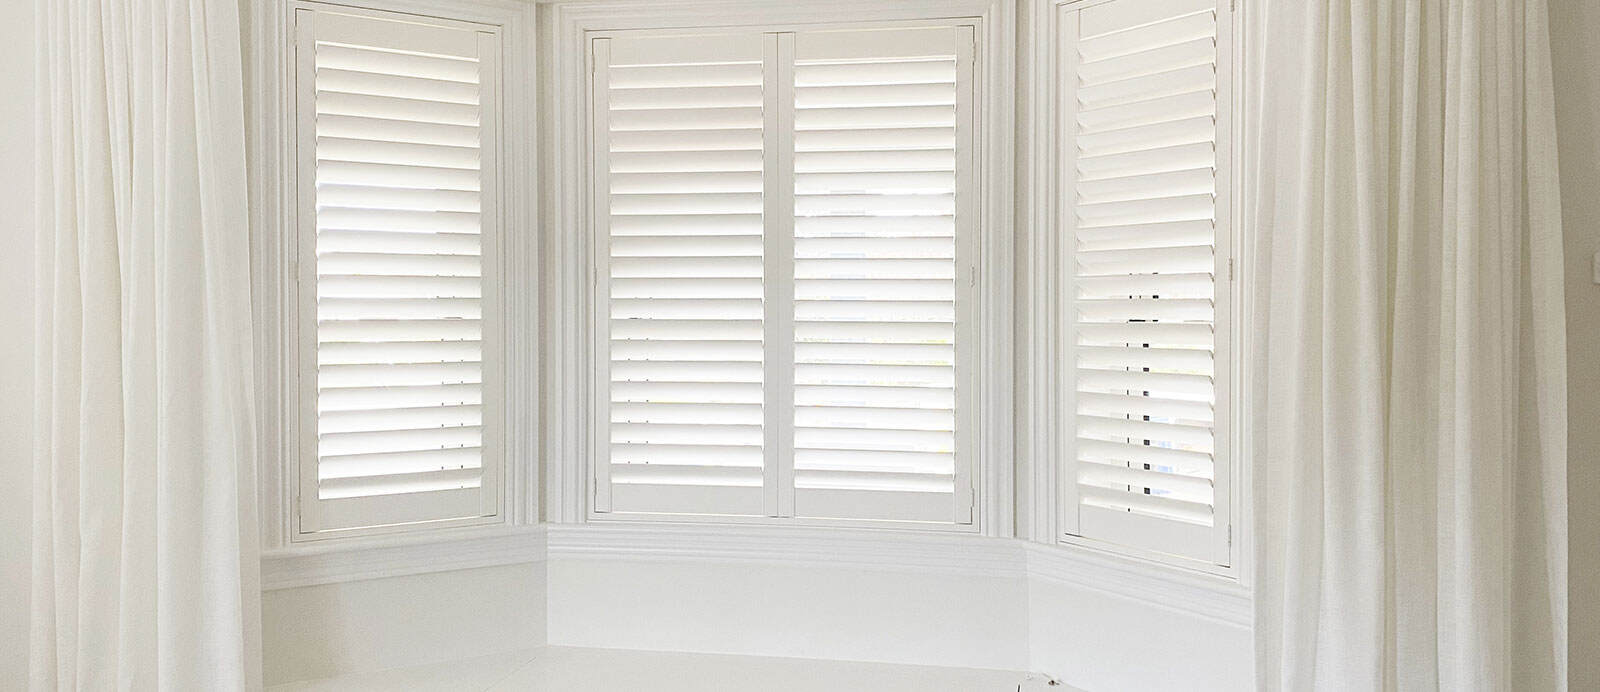 plantation shutters with sheer curtains